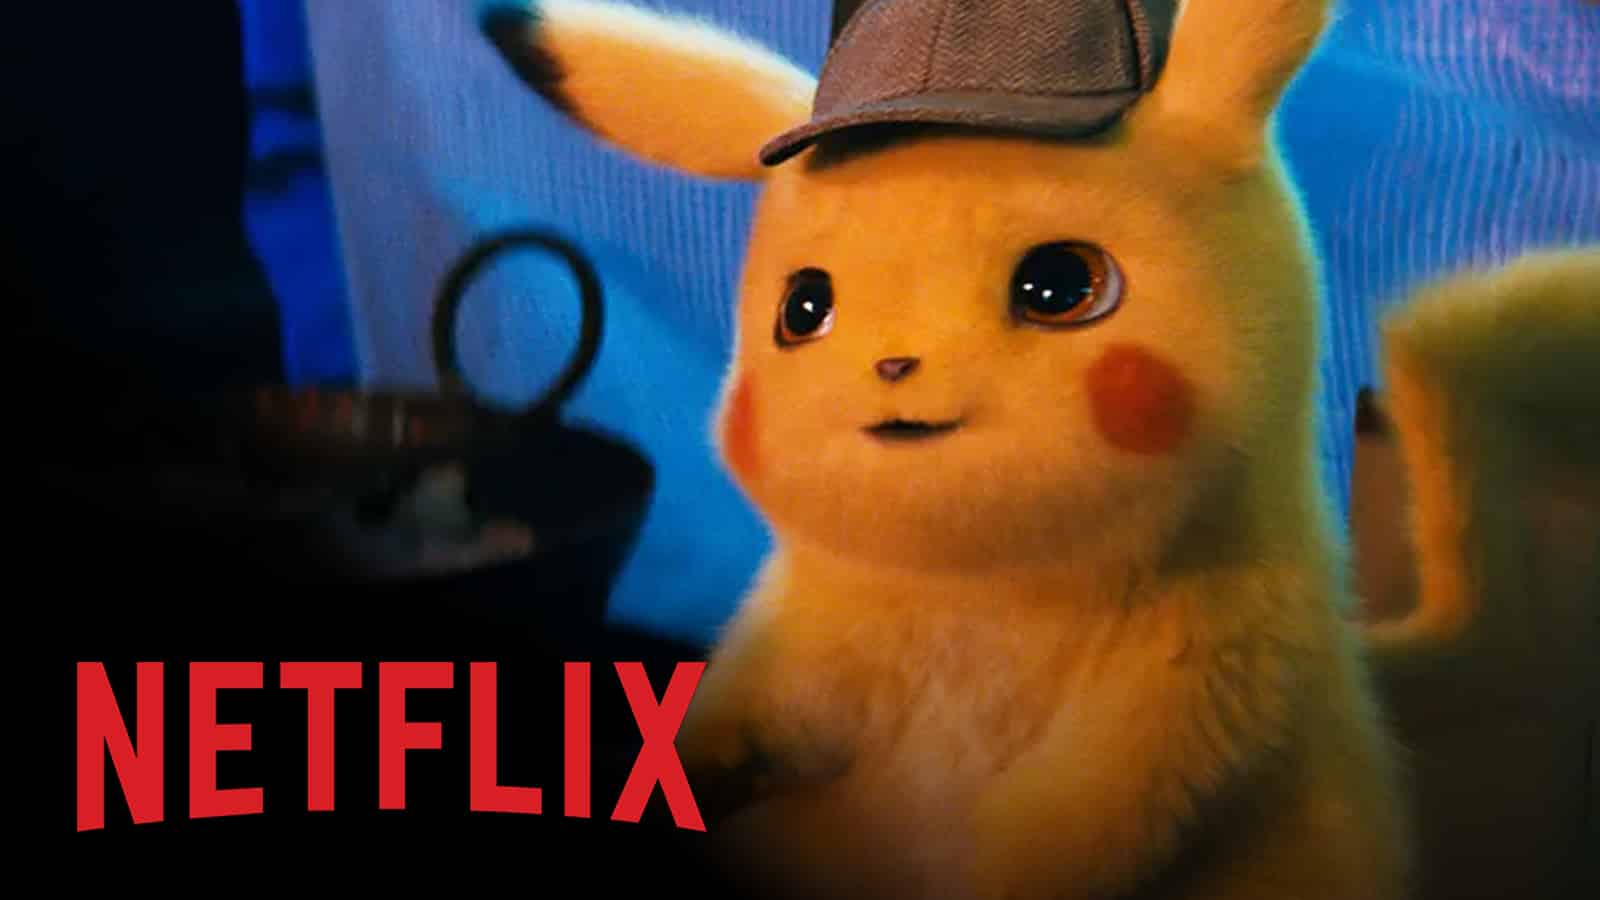 Detective Pikachu standings next to a live-action Netflix series logo.